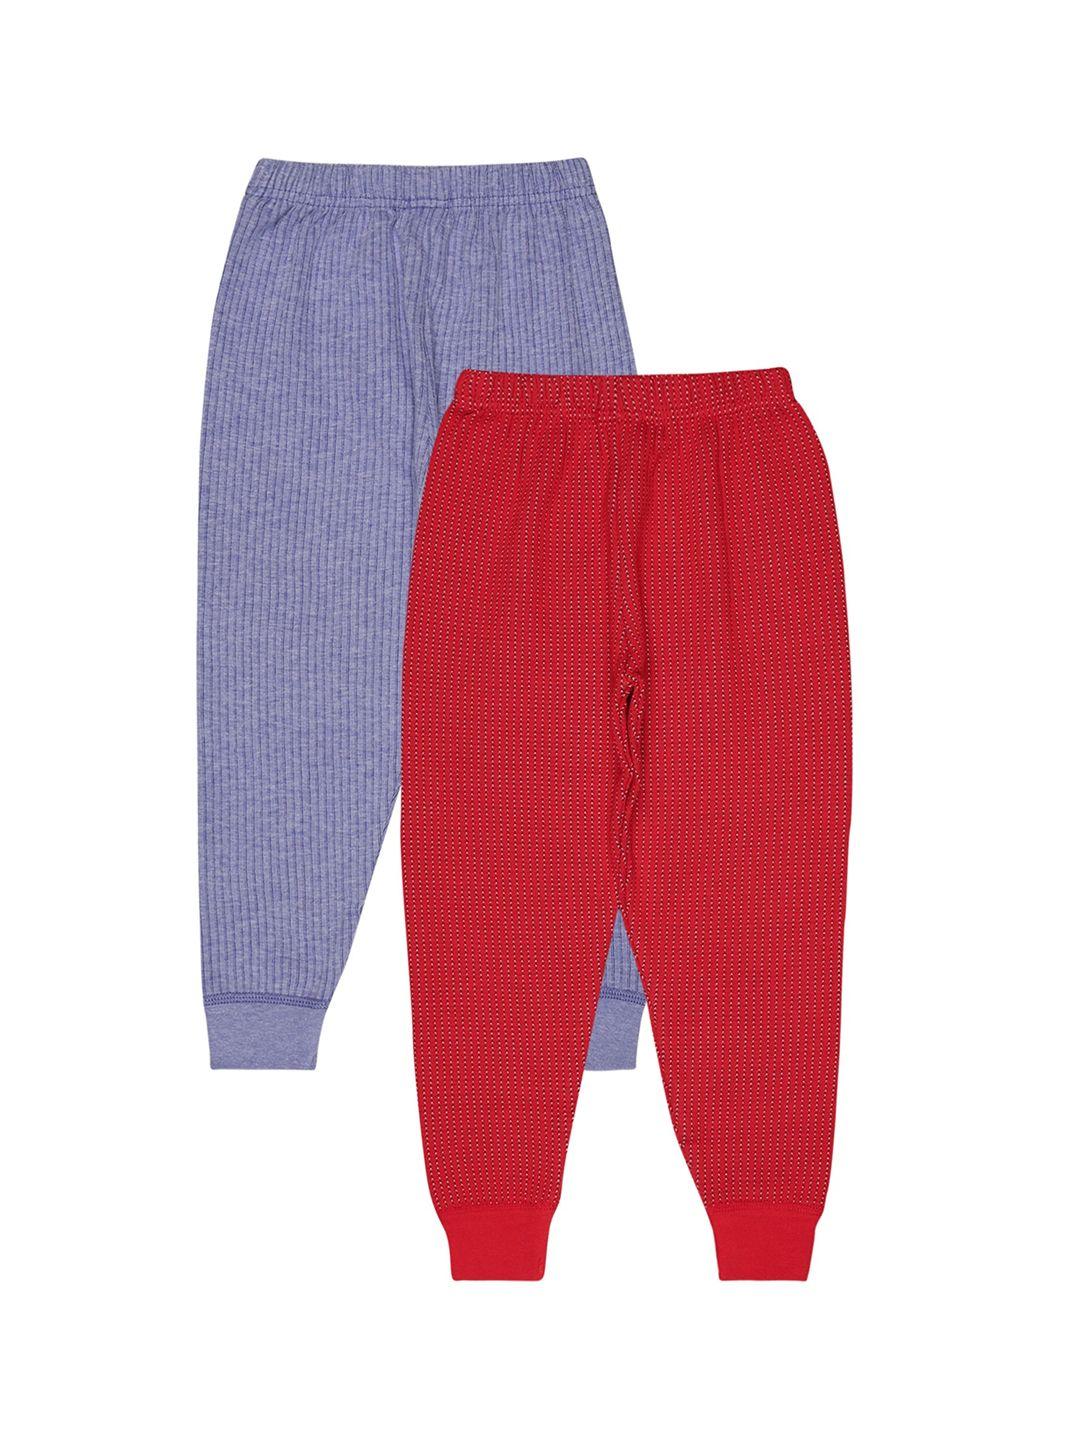 bodycare insider kids pack of 2 printed thermal bottoms